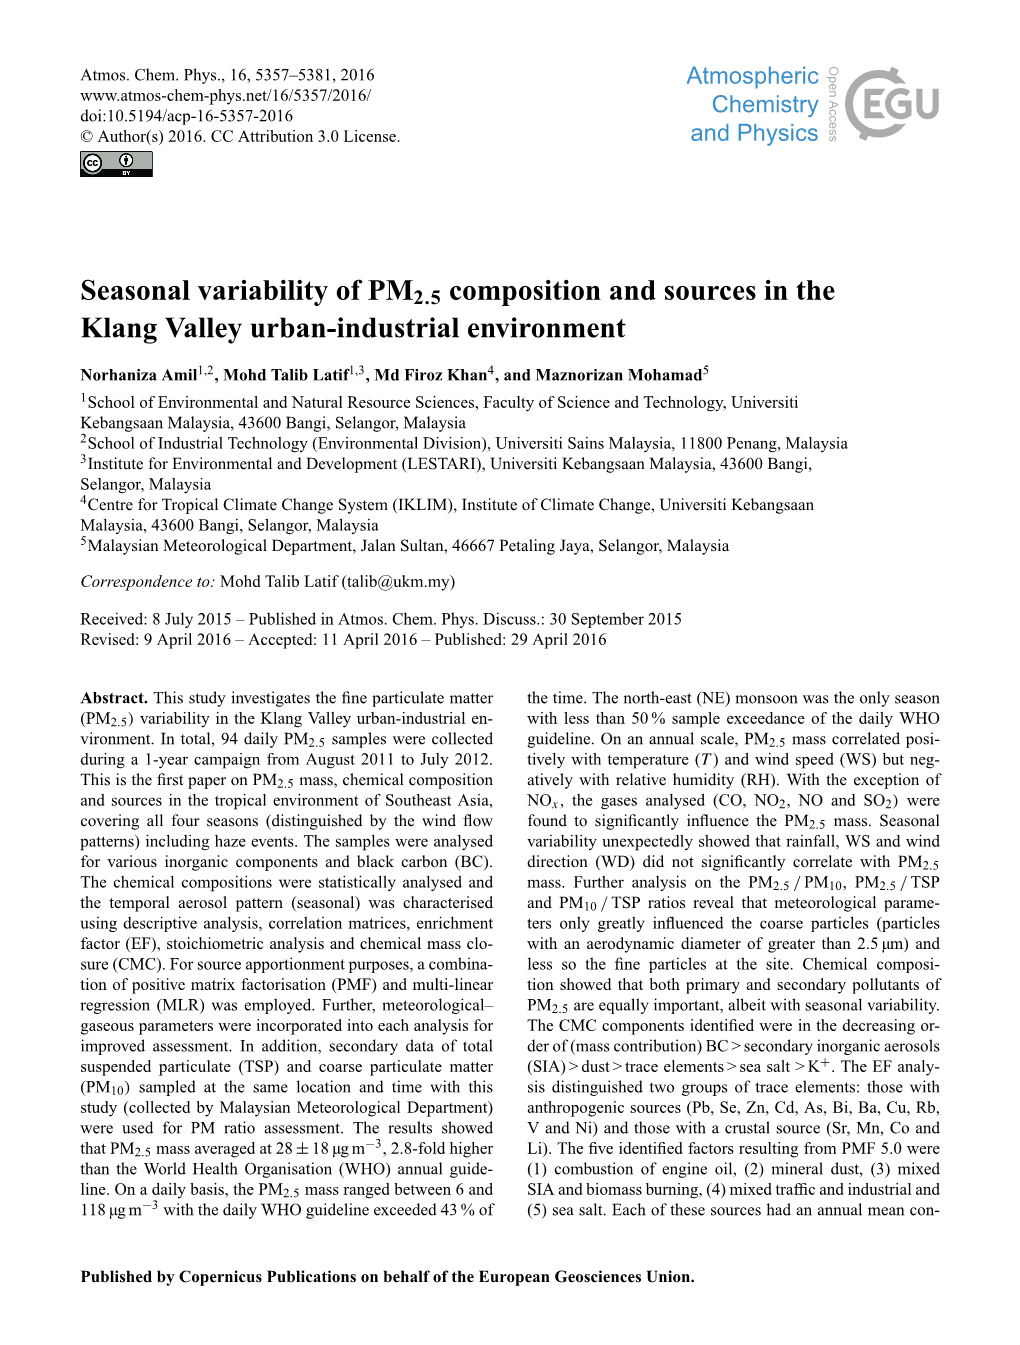 Seasonal Variability of PM2.5 Composition and Sources in the Klang Valley Urban-Industrial Environment